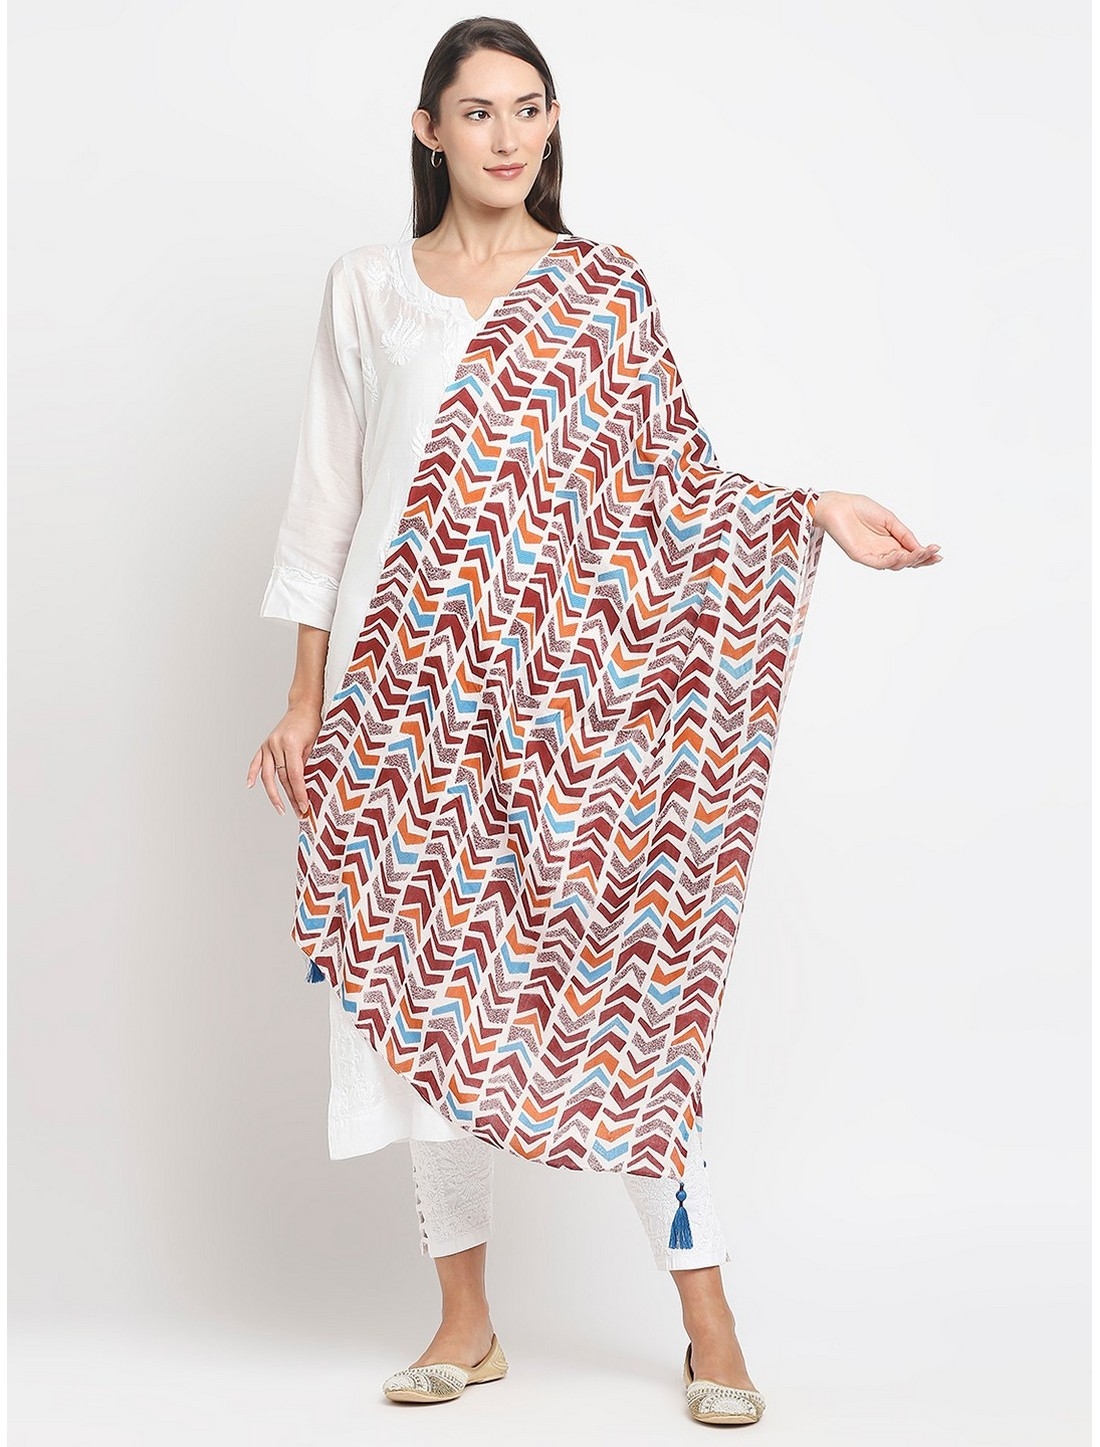 Get Wrapped | Get Wrapped Multi  Printed Scarves with Tassels for Women 0